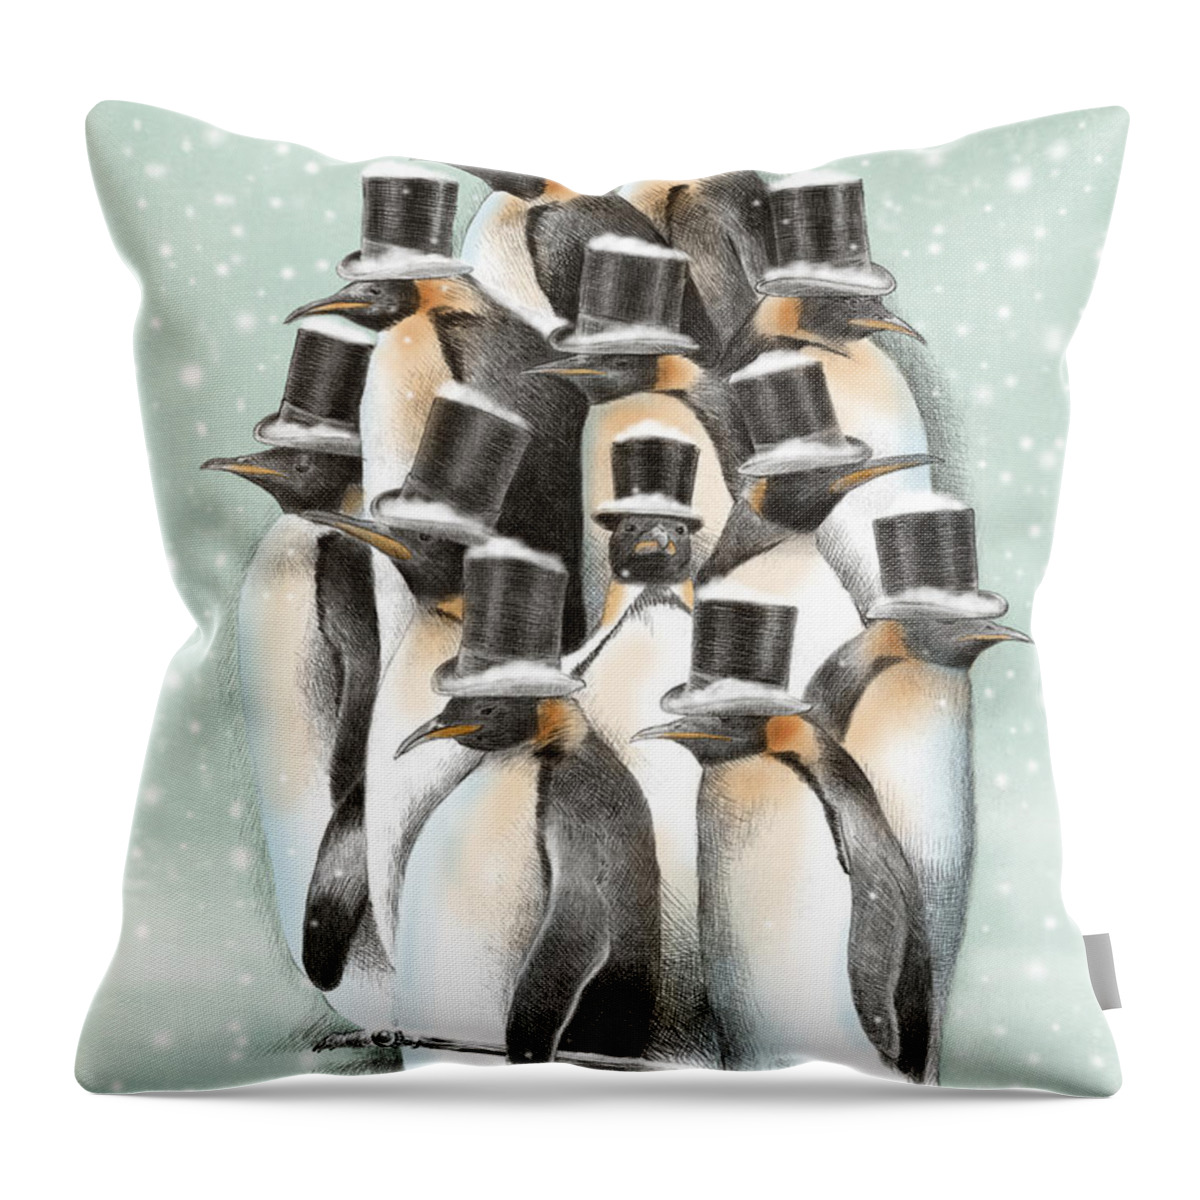 Penguins Throw Pillow featuring the drawing A Gathering in the Snow by Eric Fan